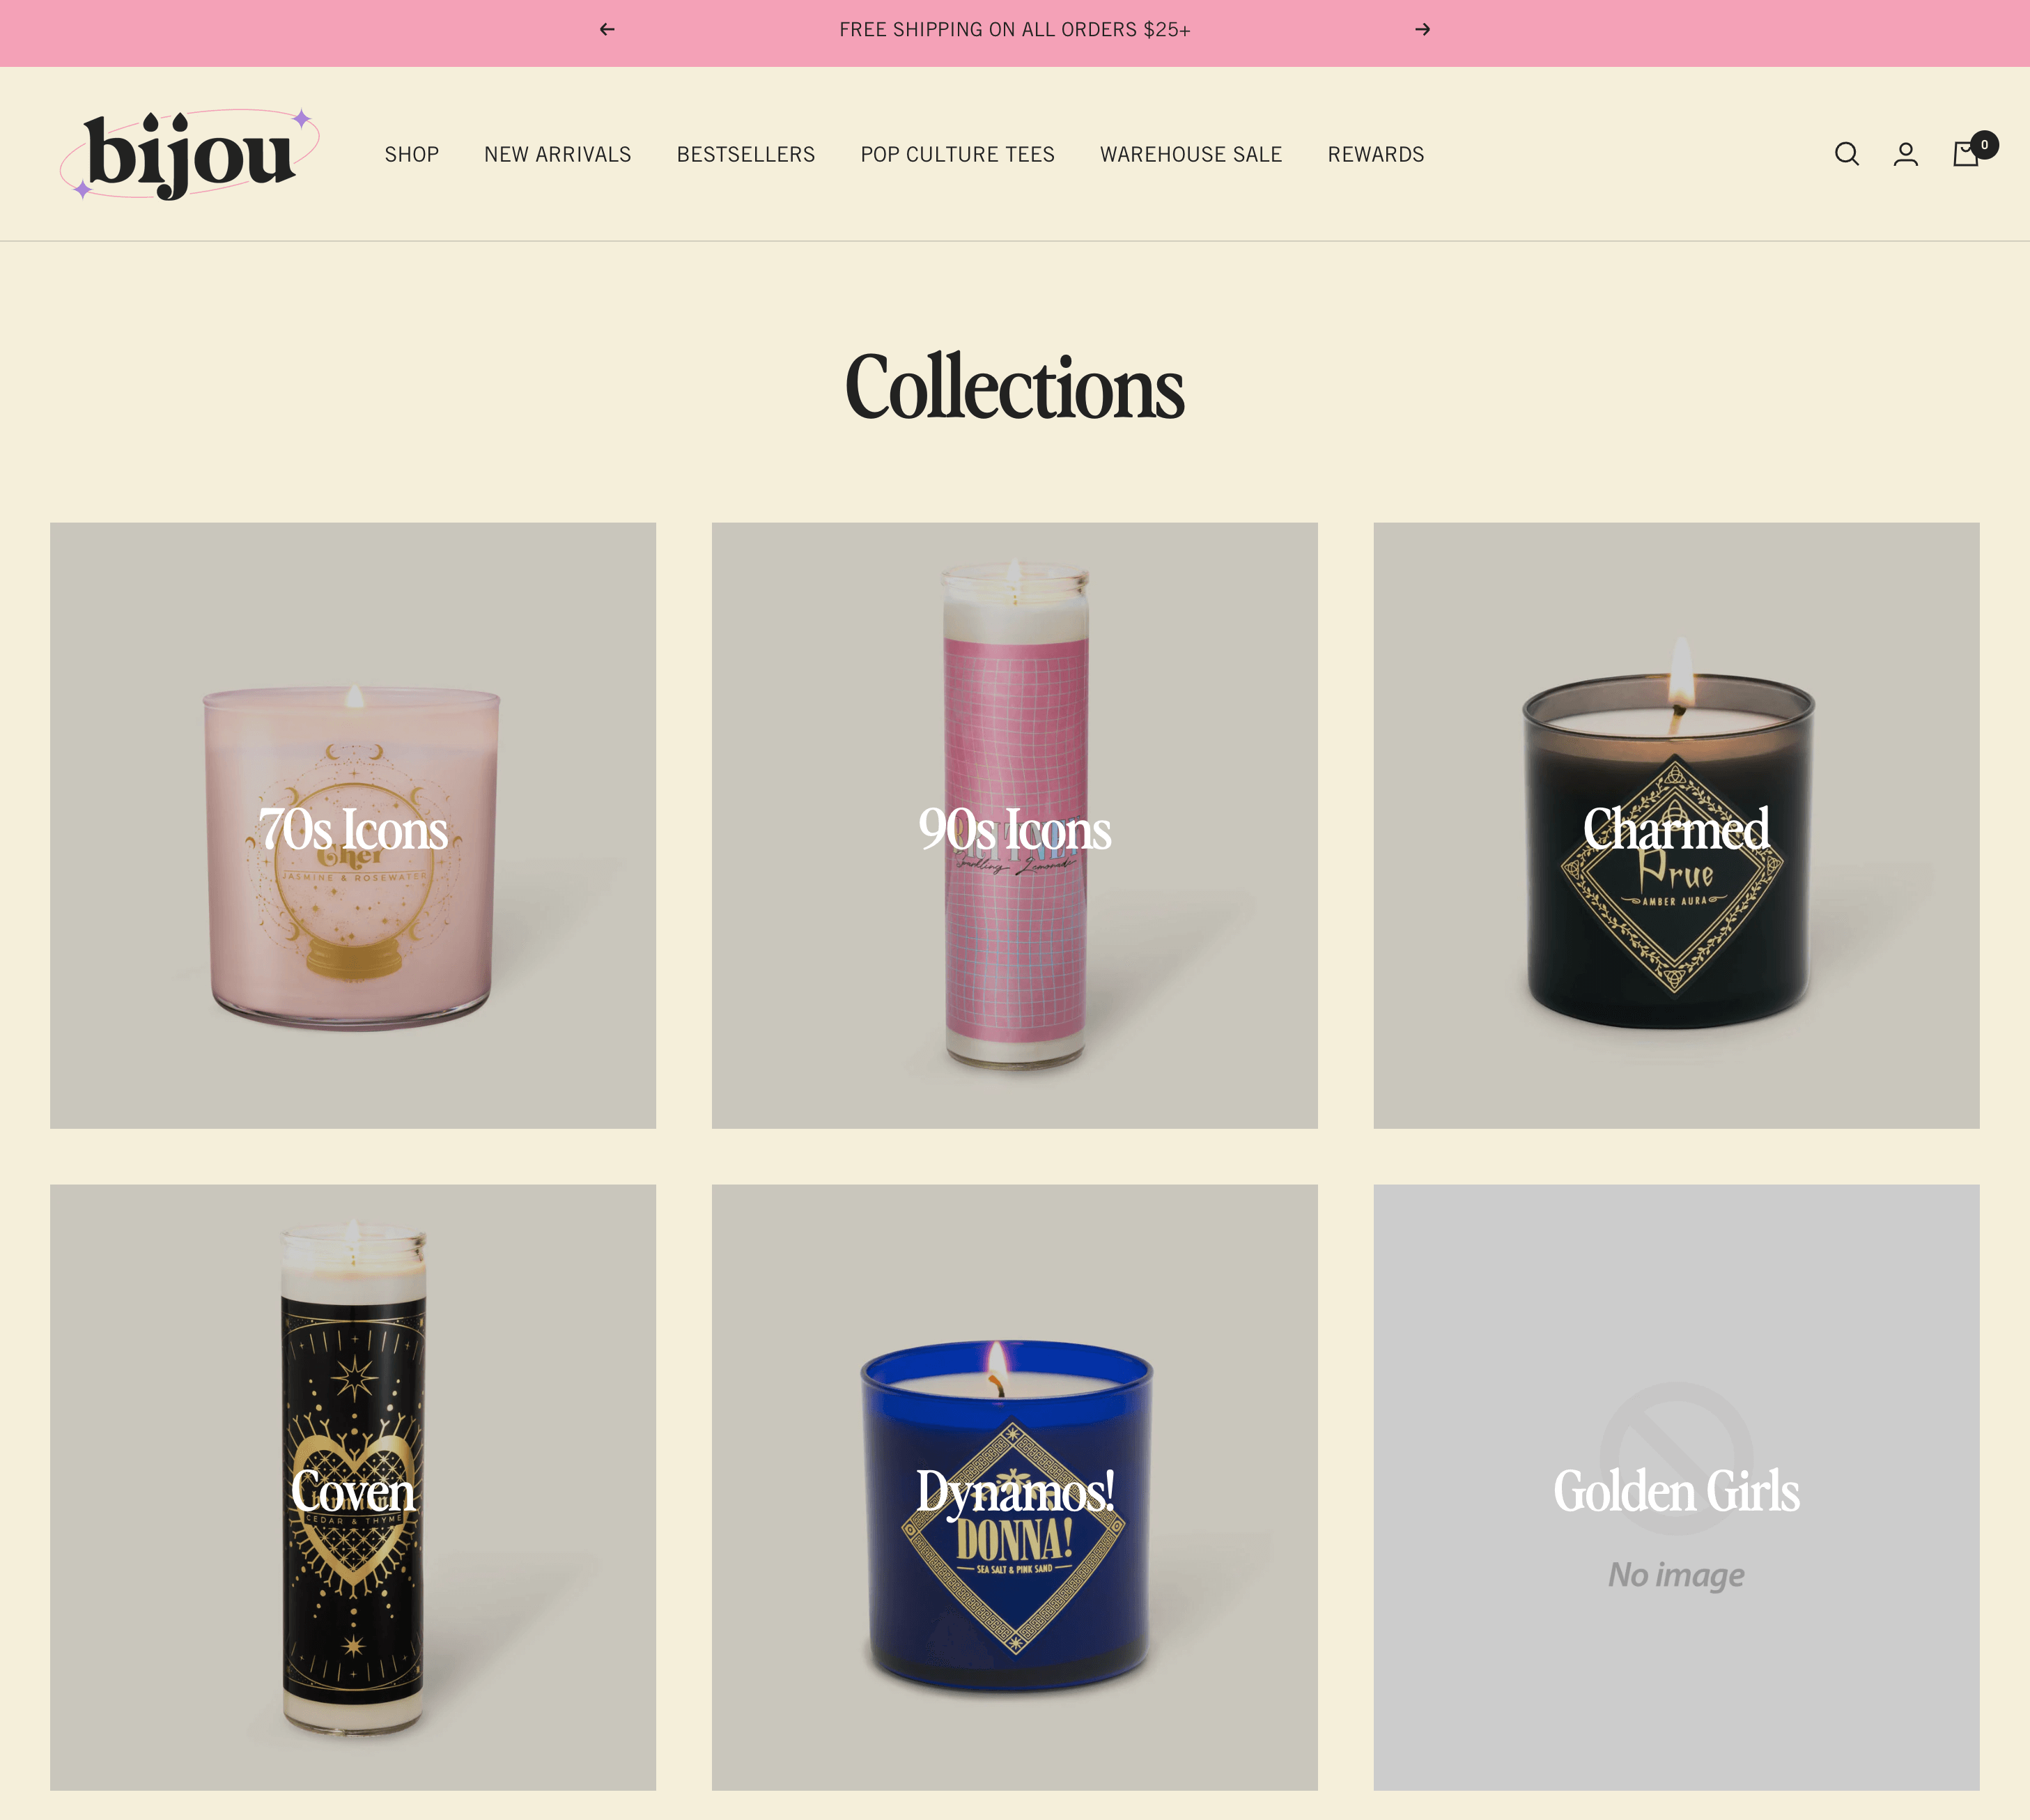 Valentine’s Day Gift Guide–A screenshot showing 6 candles on Bijou Candles’ website titled “Collections.” The 6 collections shown are 70s Icons, 90s Icons, Charmed, Coven, Dynamos!, and Golden Girls. 